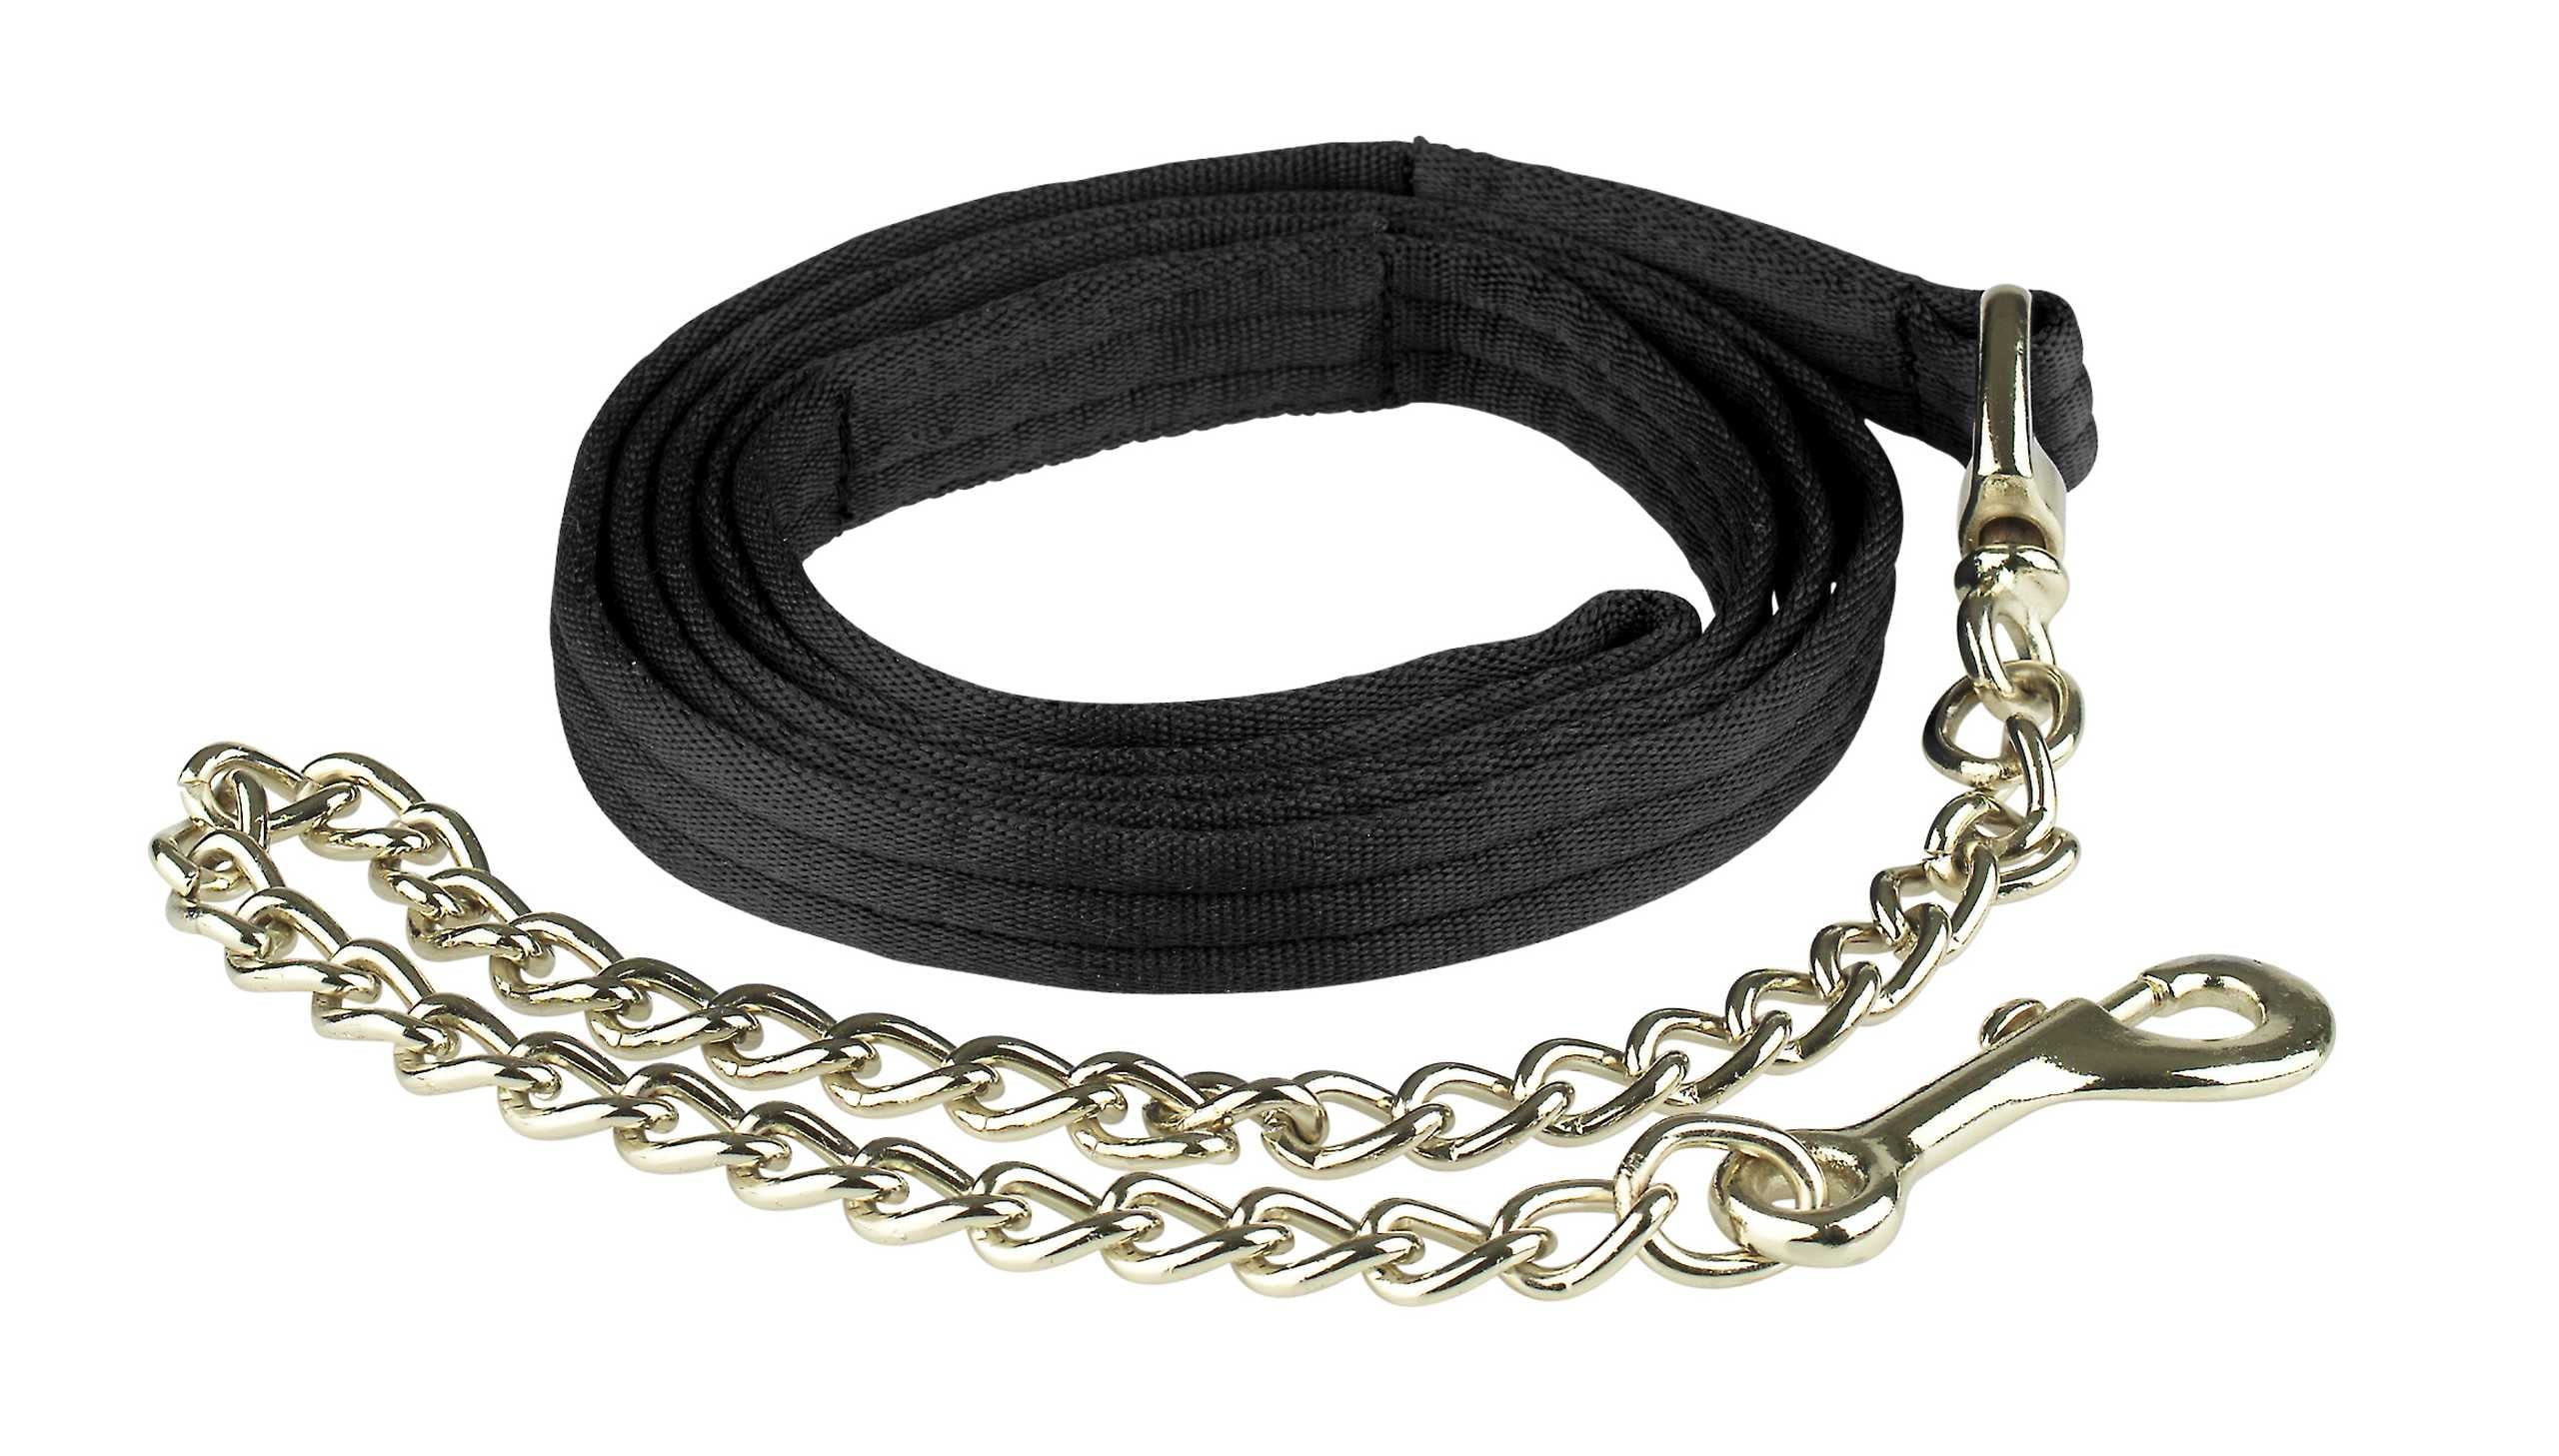 Finntack Pro Cushioned Web Lead Shank with Single Chain